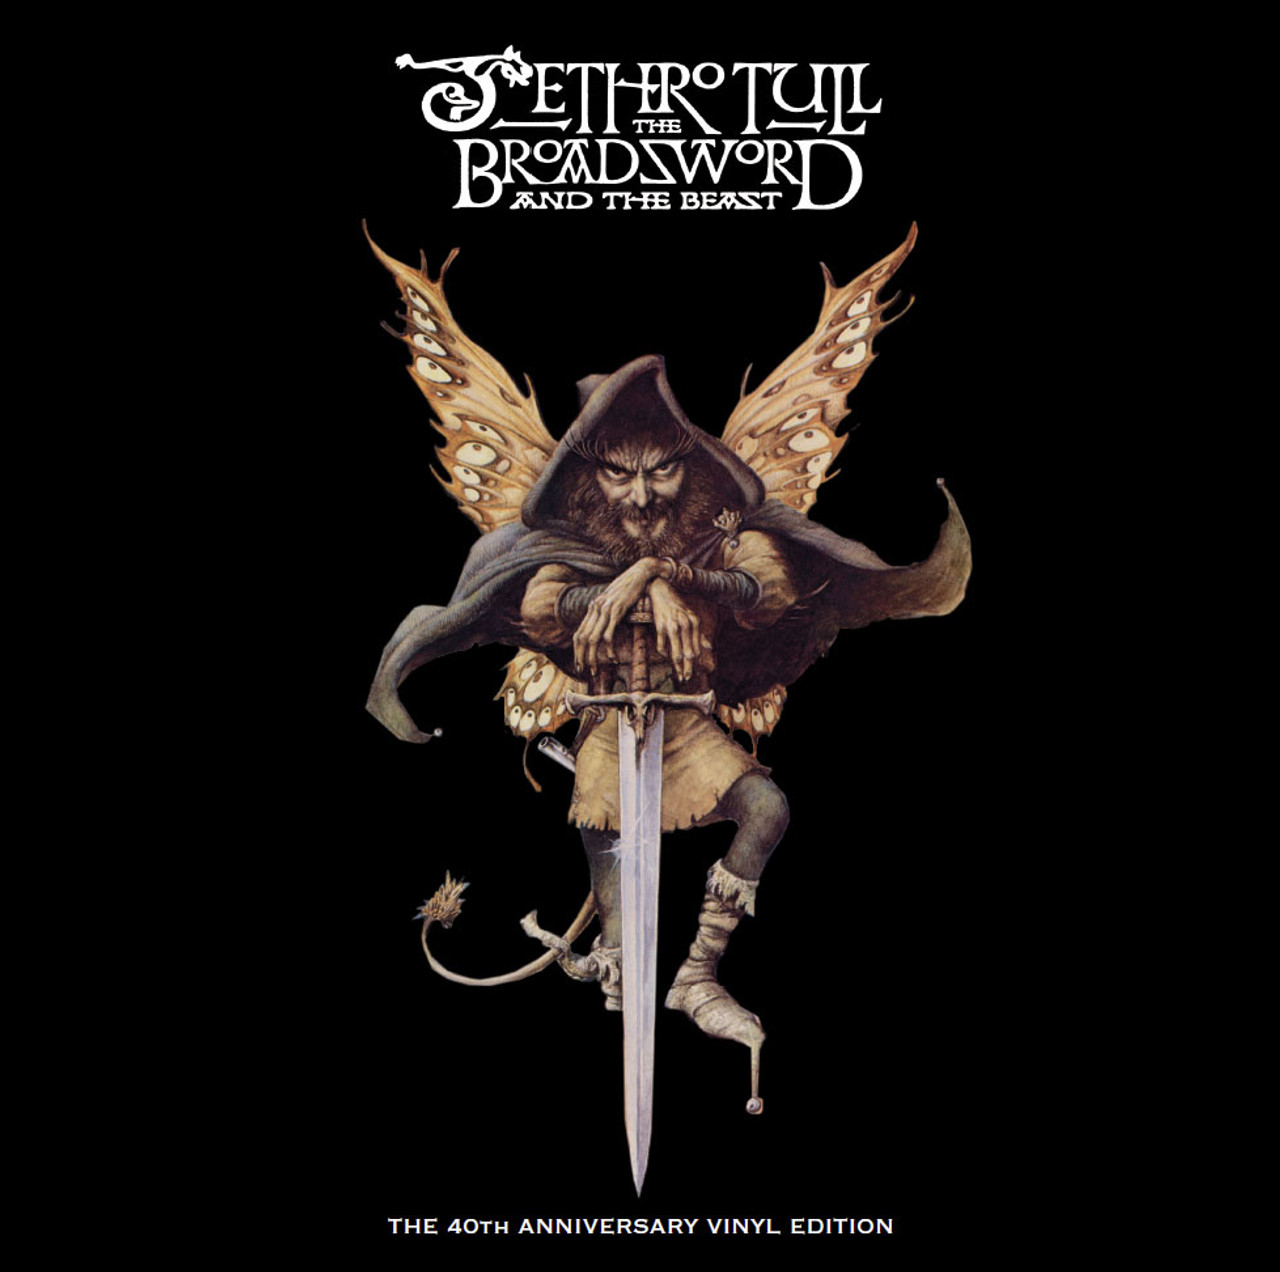 Jethro Tull The Broadsword and the Beast (The 40th Anniversary Vinyl  Edition) 4LP Box Set